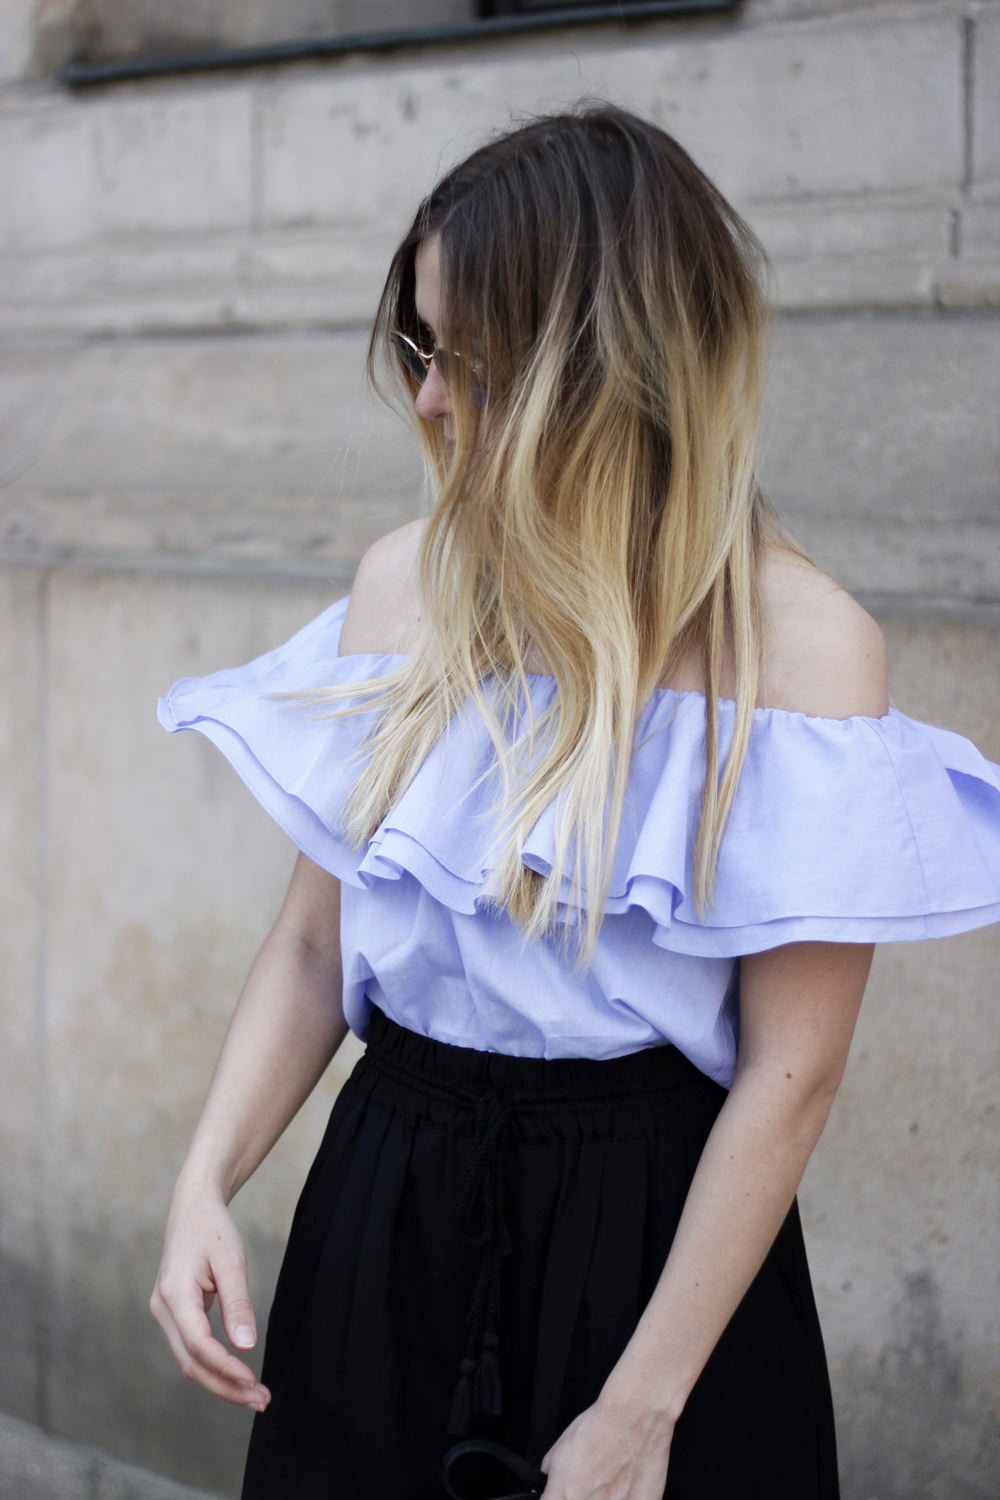 romina-mey-streetstyle-Off-Shoulder-Blouse